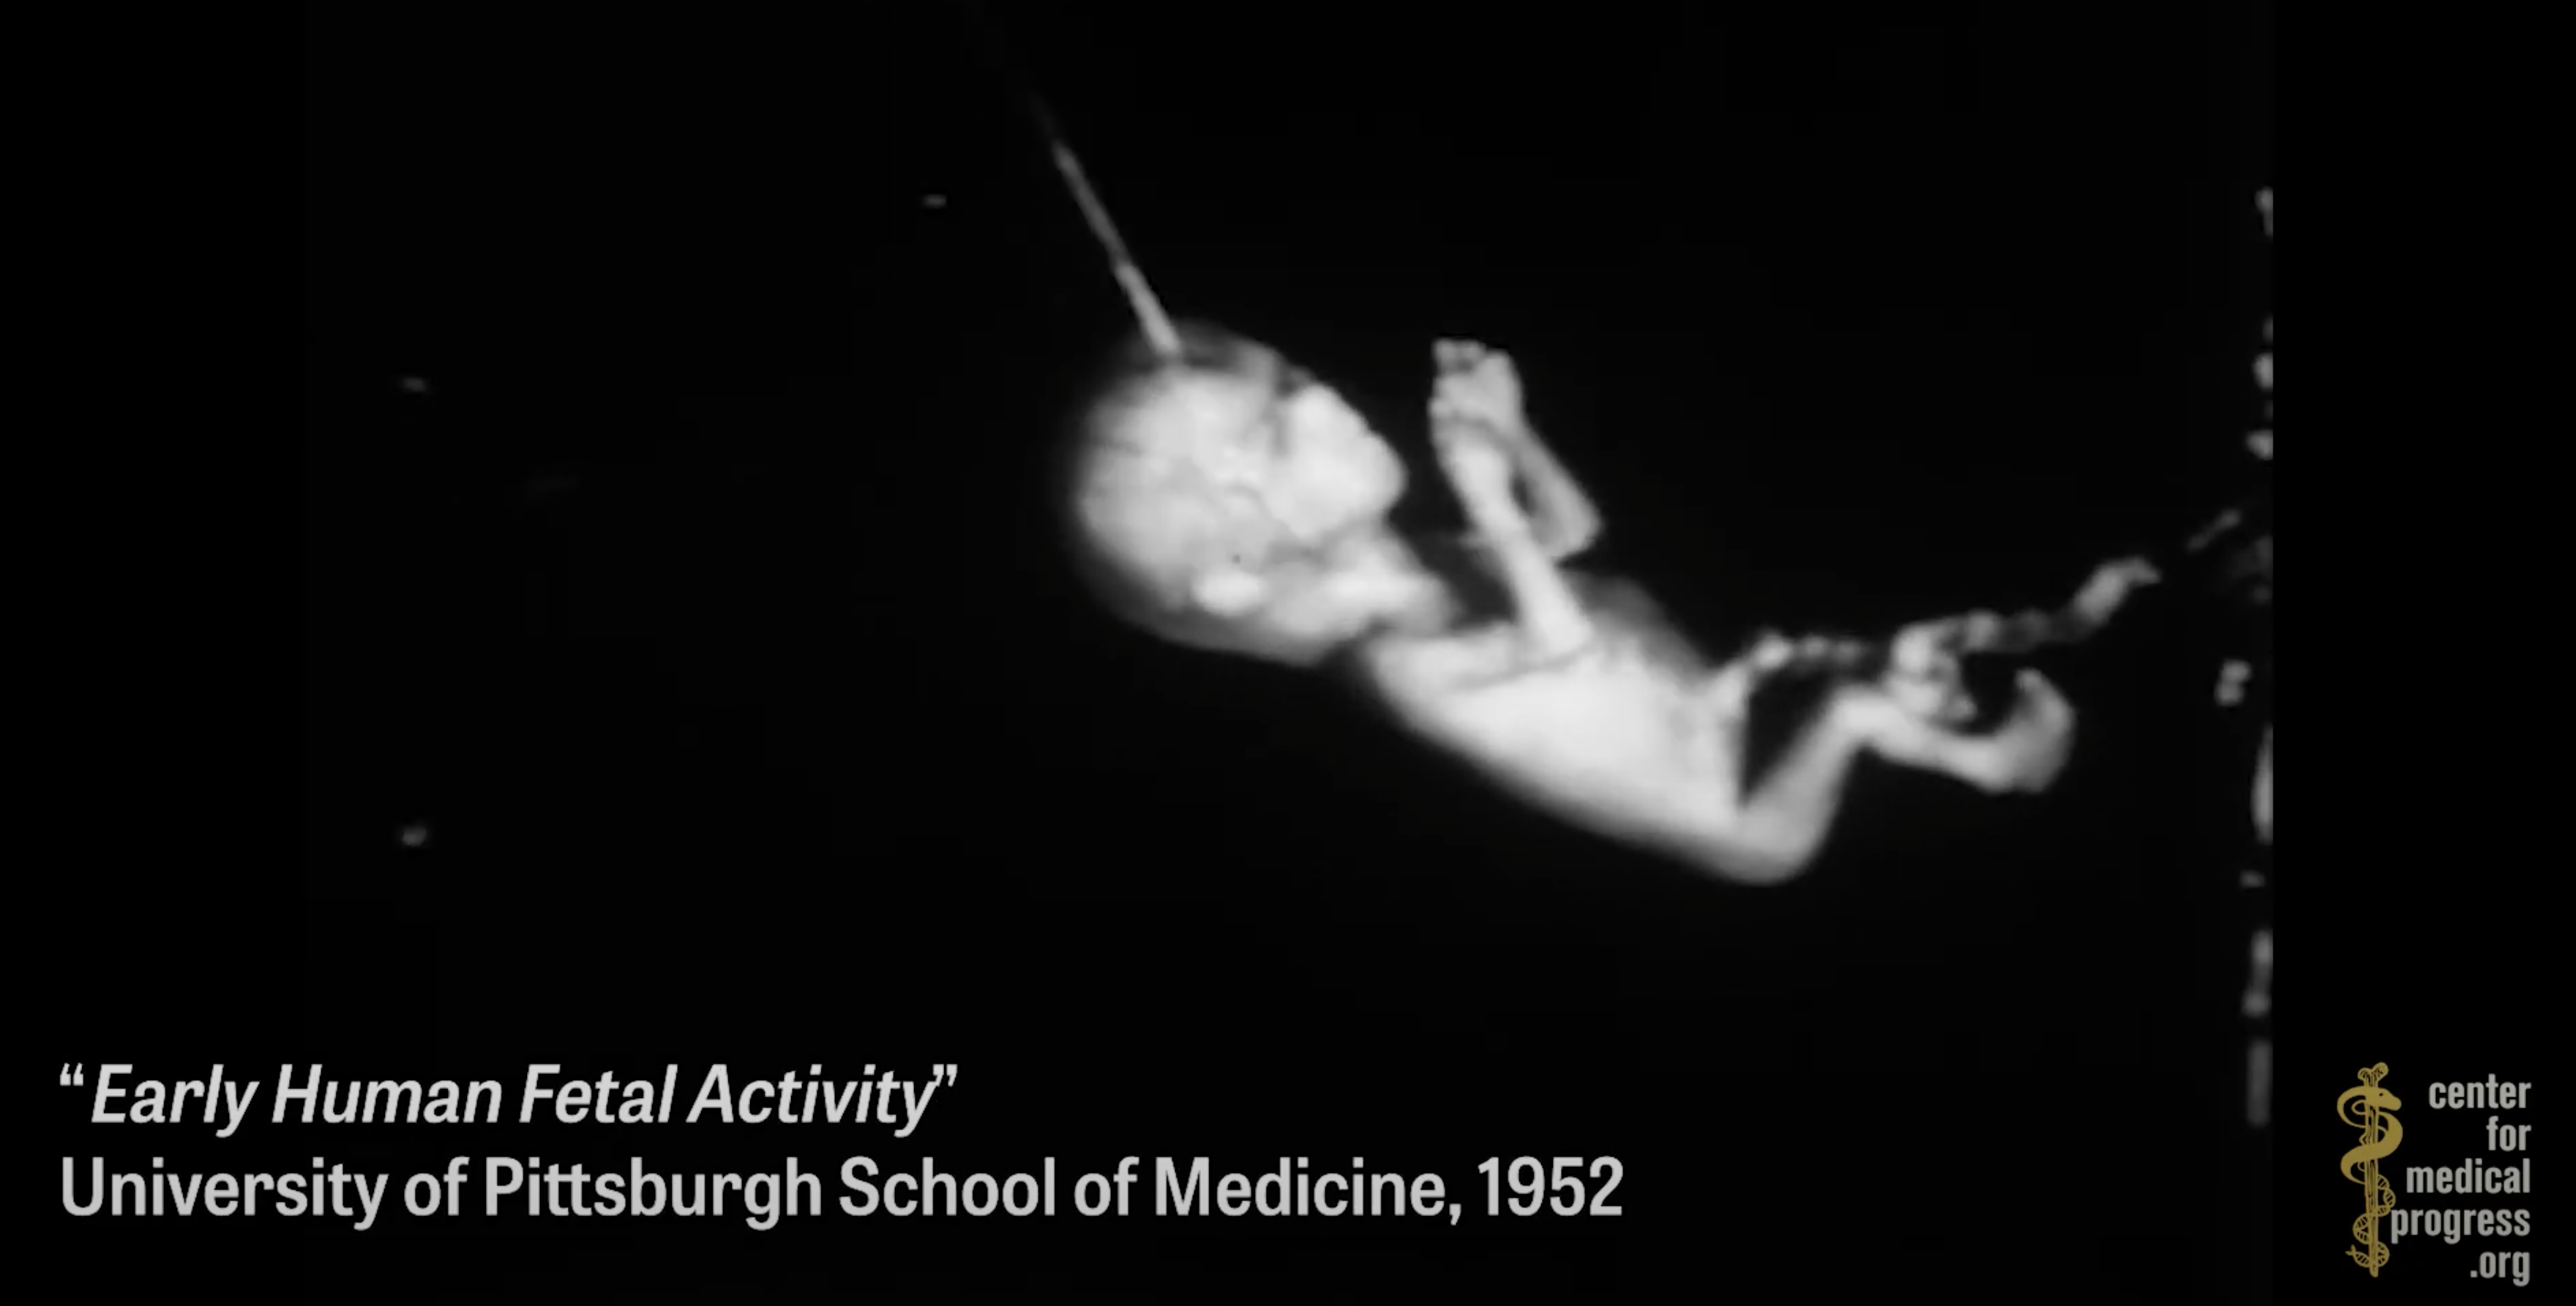 Image: UC San Francisco engaging in horrifying experiments, organ harvesting of live babies in the name of “science”